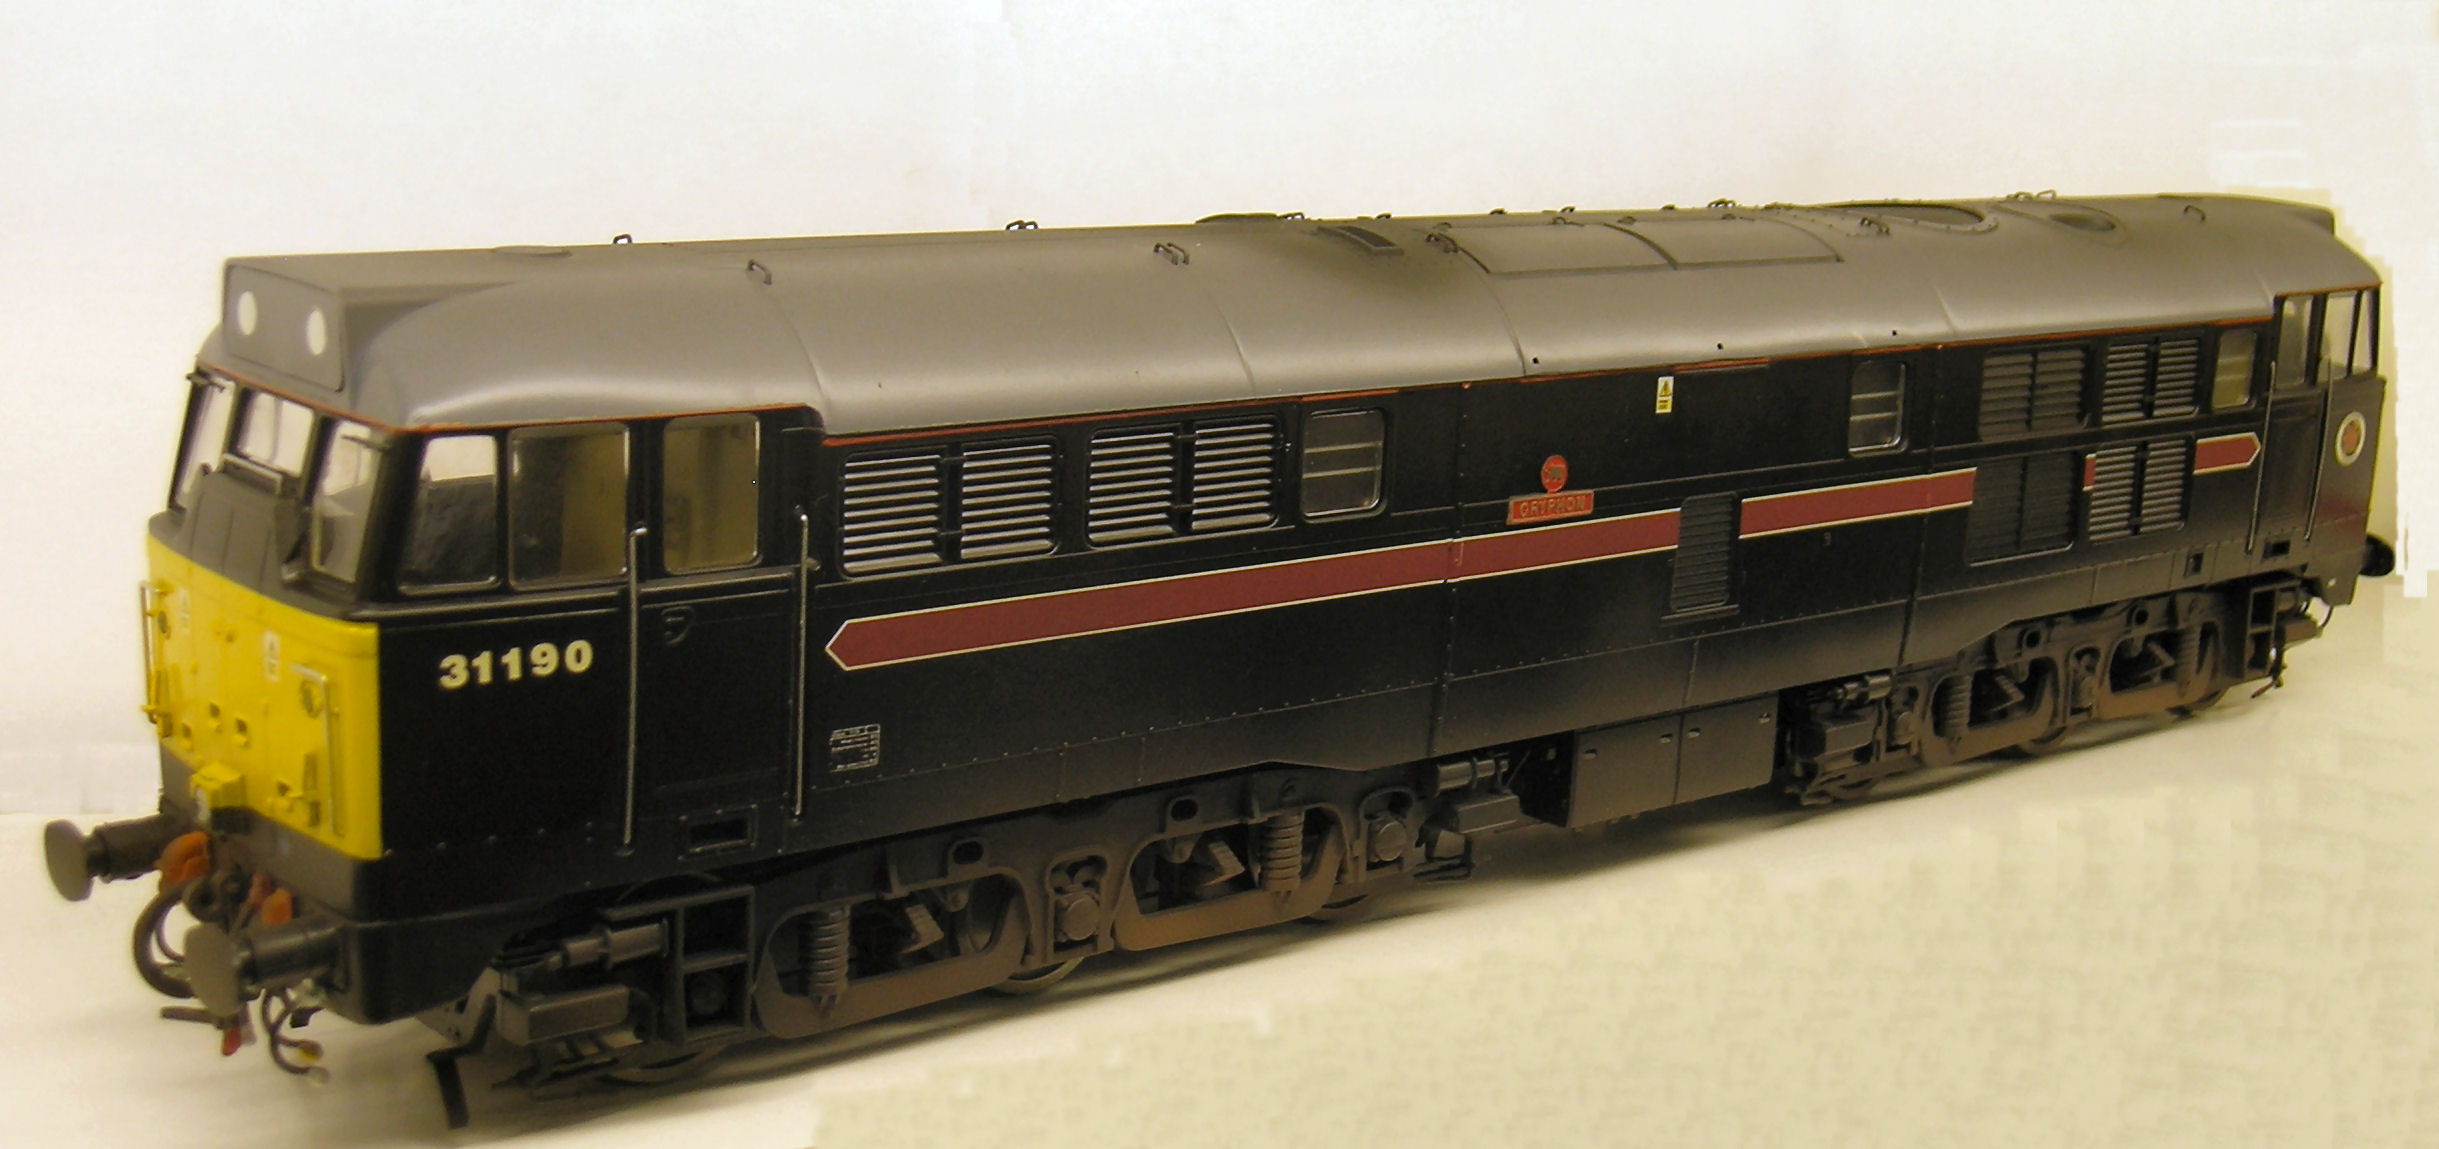 31190 Gryphon Heljan Class 31 full repaint into Fragonset livery lightly weathered.